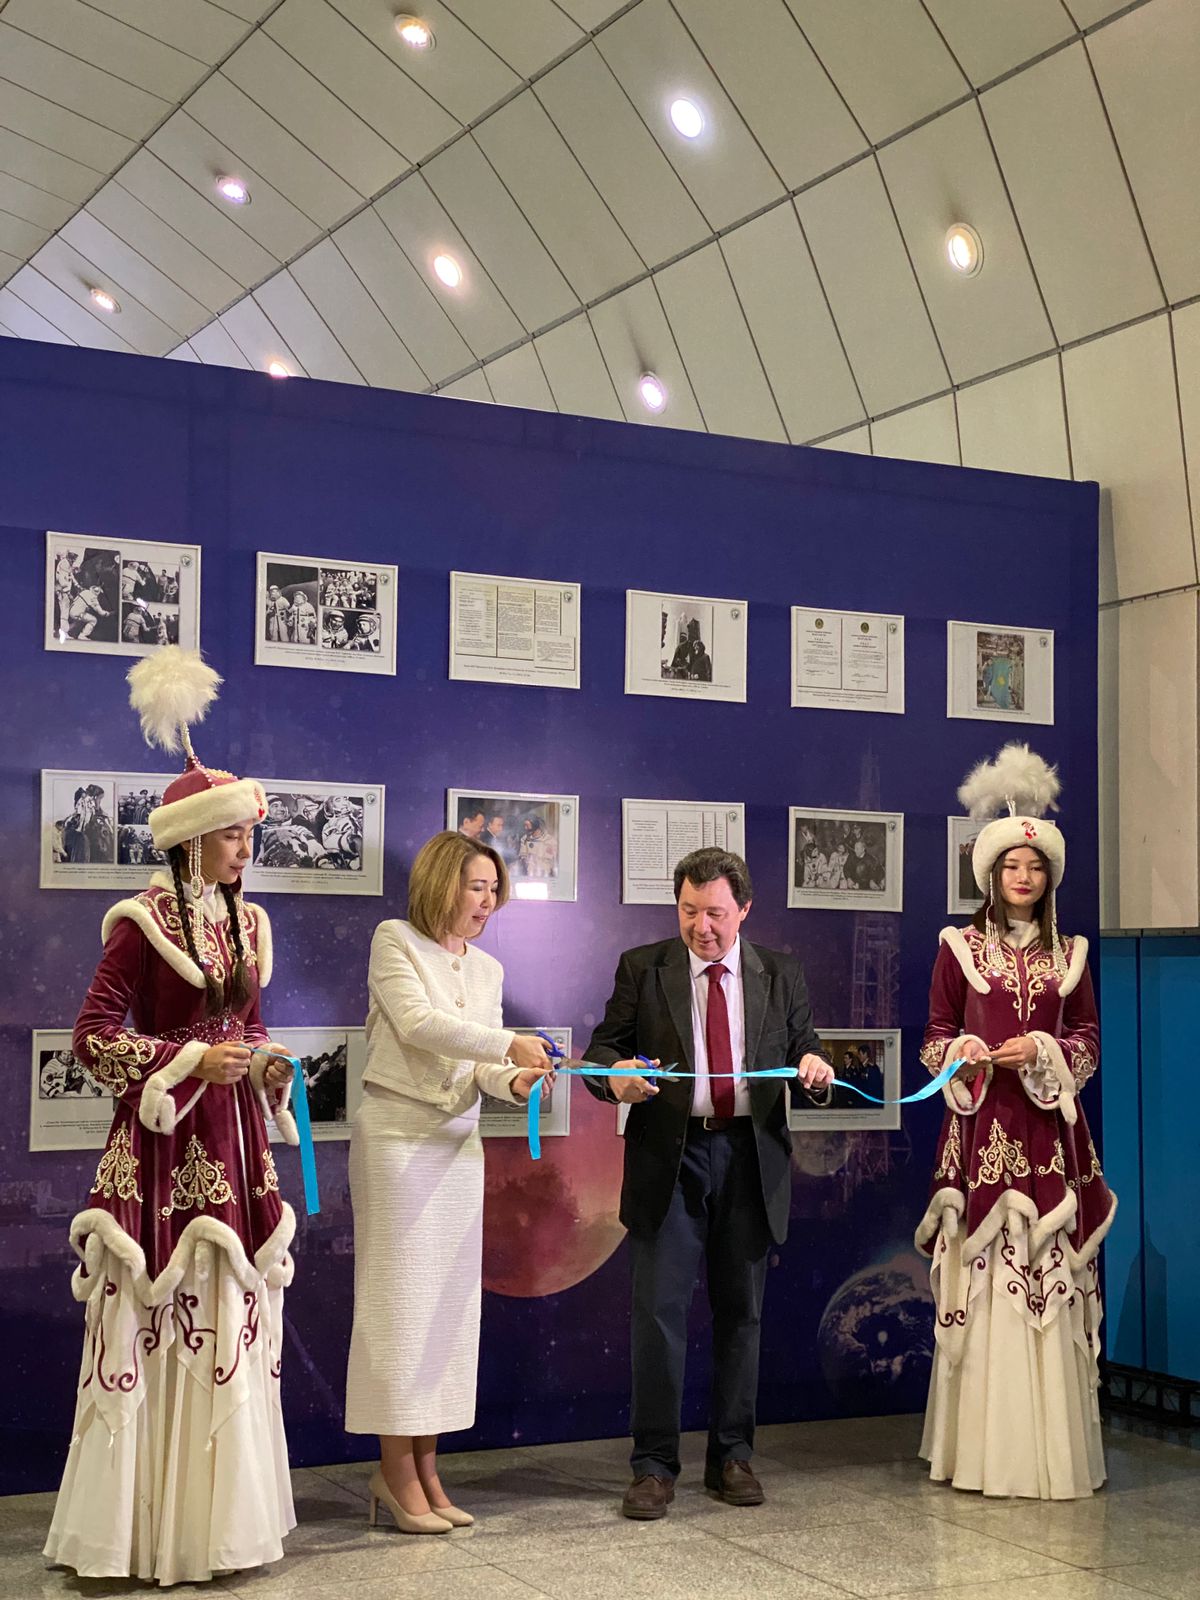 AS PART OF THE INTERNATIONAL CONGRESS OF ARCHIVISTS, A HISTORICAL AND DOCUMENTARY EXHIBITION WITH THE PARTICIPATION OF UNESCO, THE UN, AIMED AT SUSTAINABLE DEVELOPMENT WAS HELD